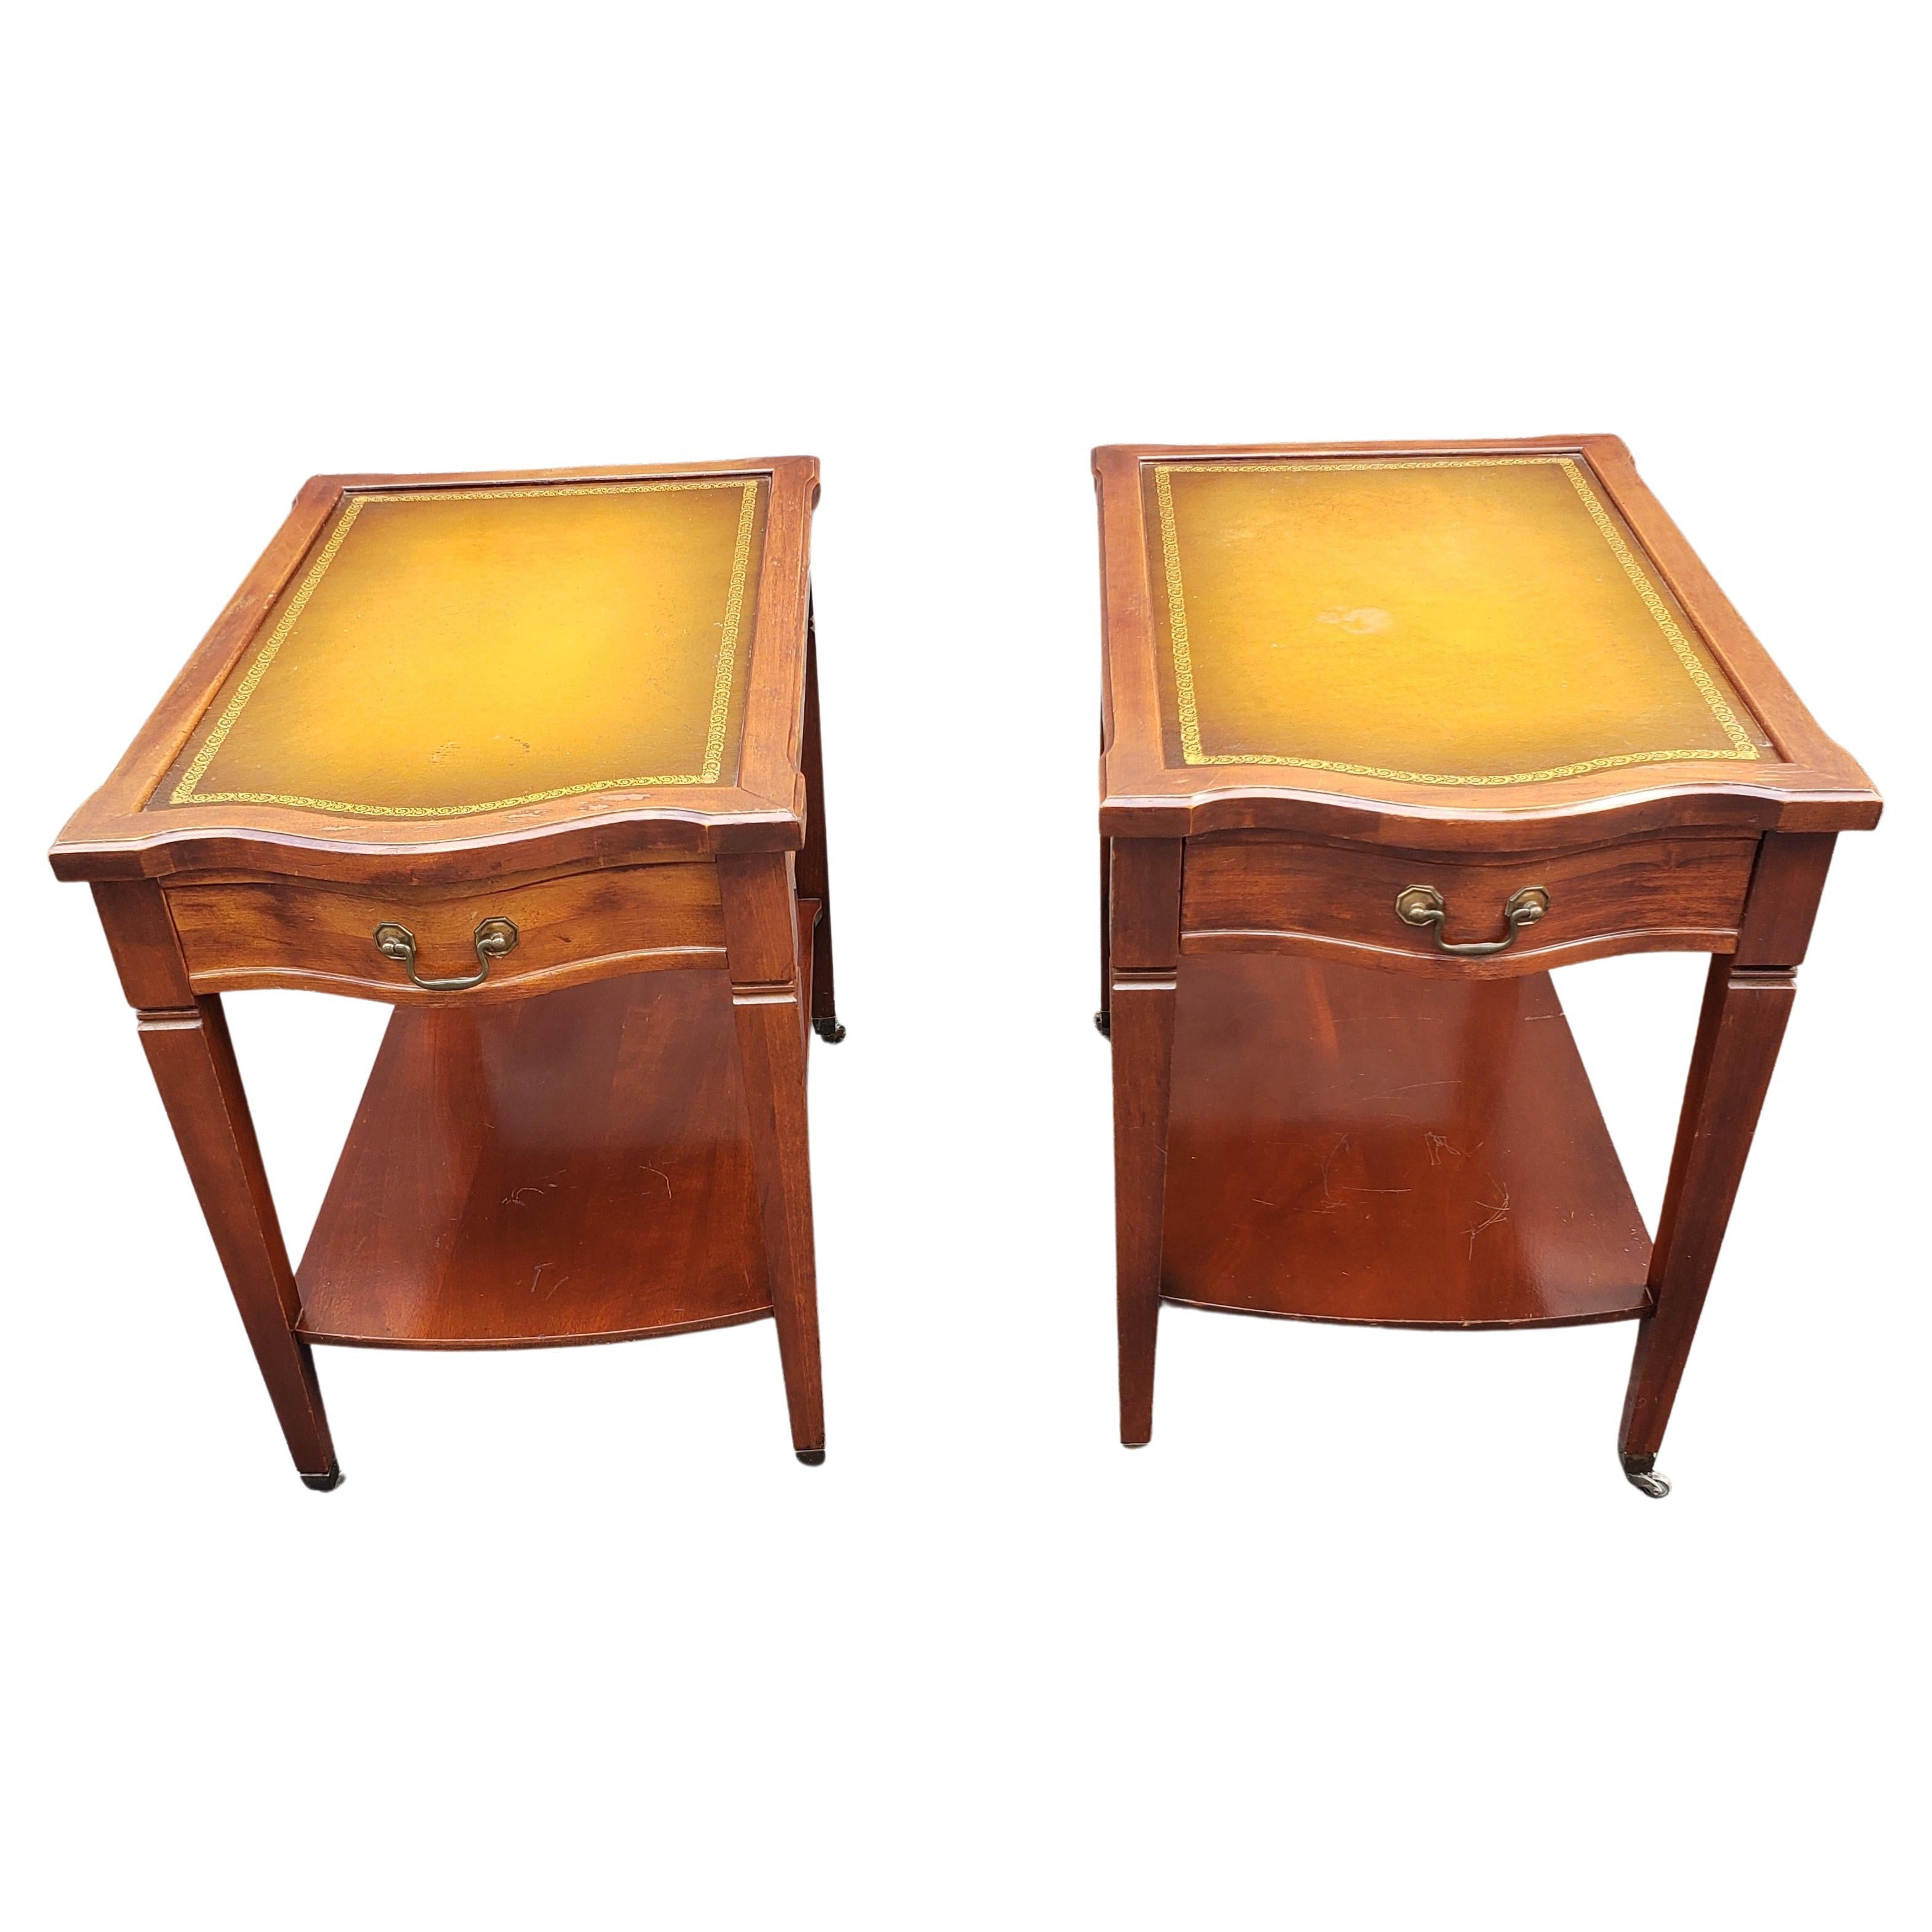 1940's Mersman Two Tier Mahogany Tooled Leather Stenciled Top Side Tables. Bon état vintage. 